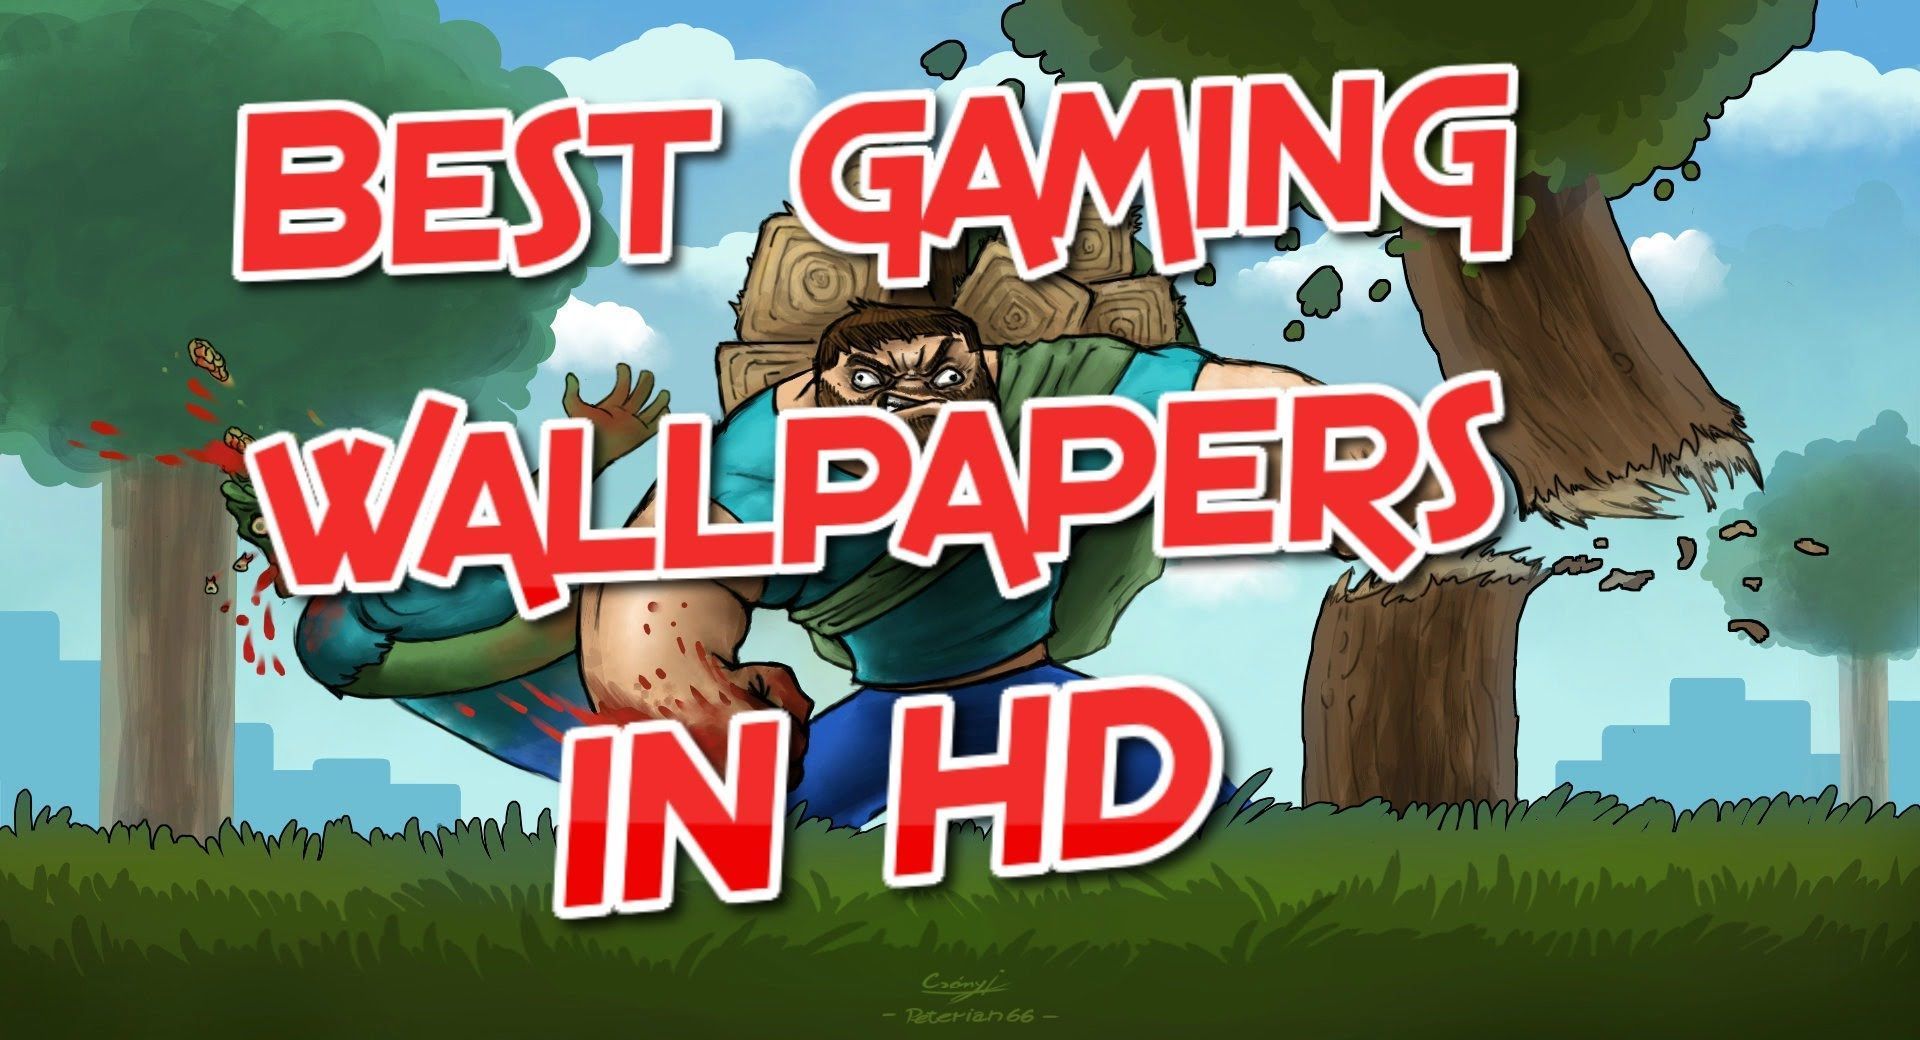 Best gaming wallpapers in HD - YouTube